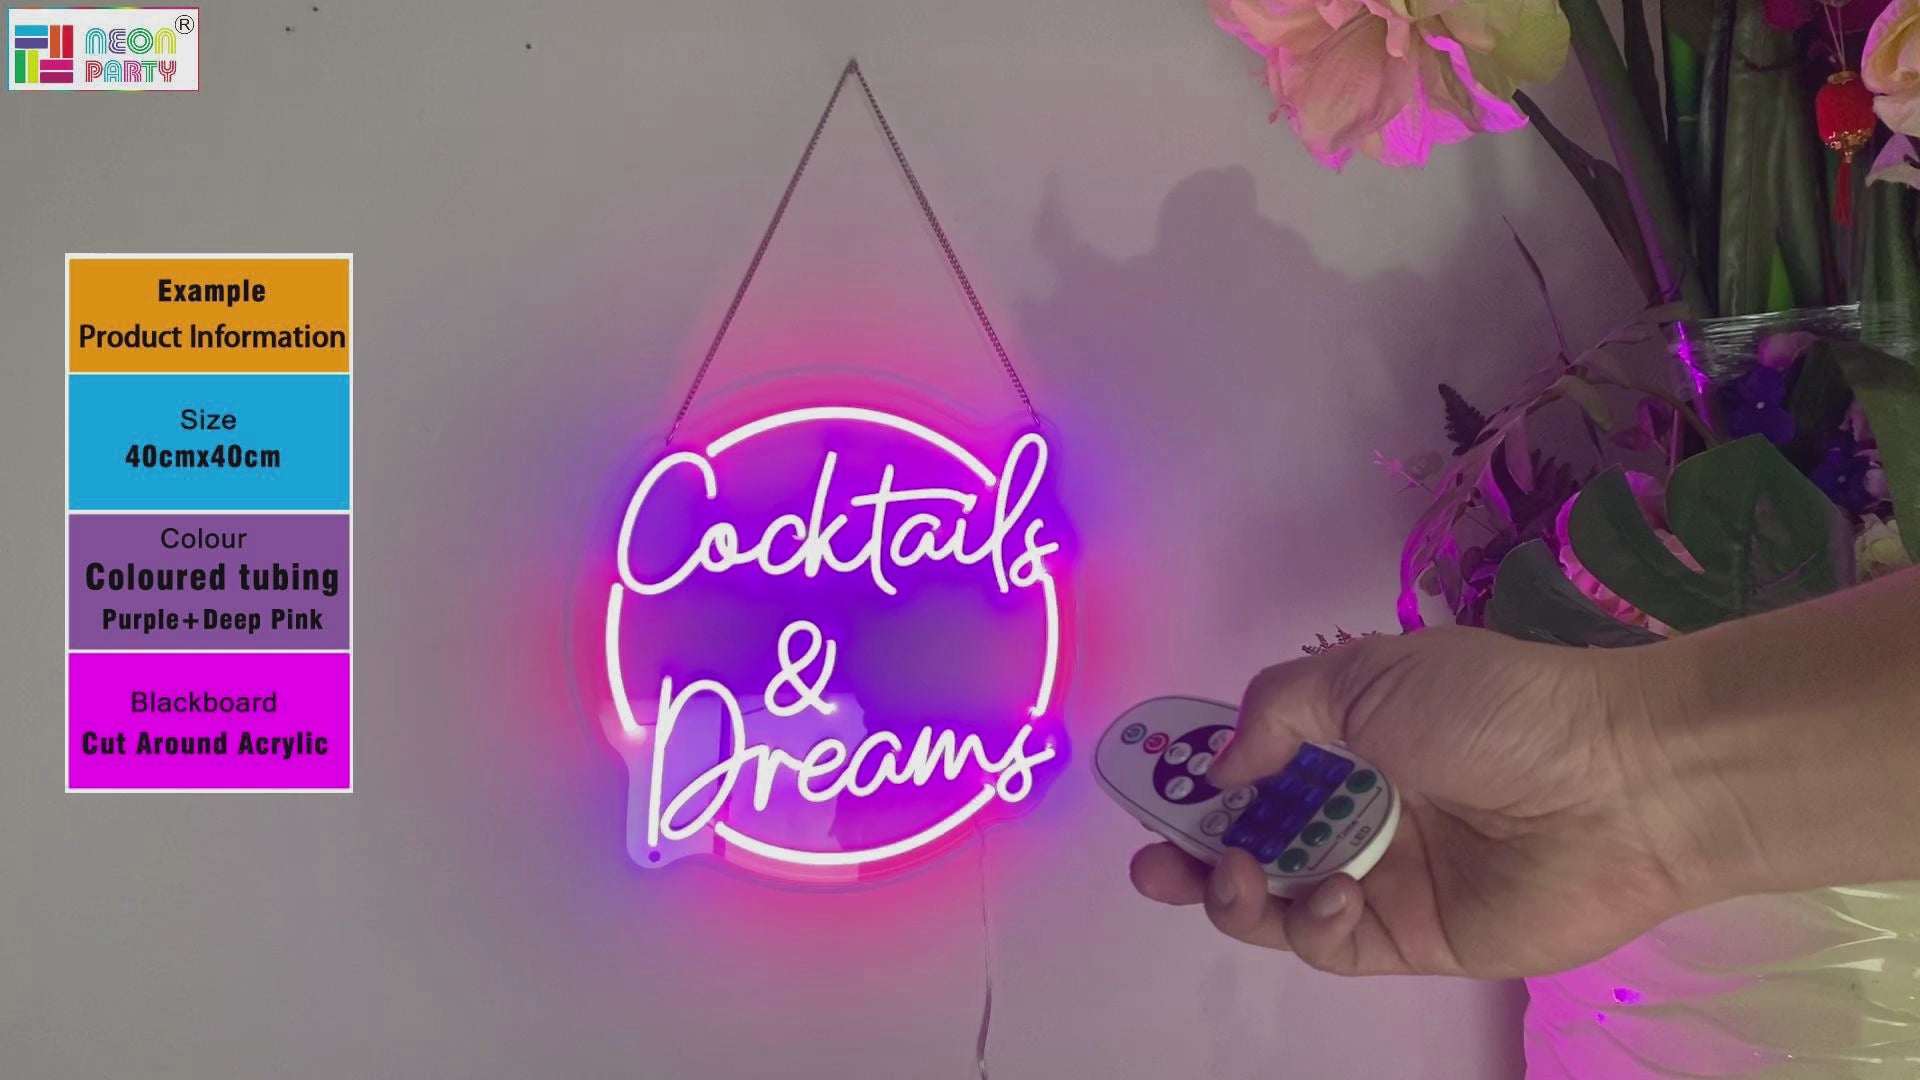 Cocktails and Dreams LED Neon Sign